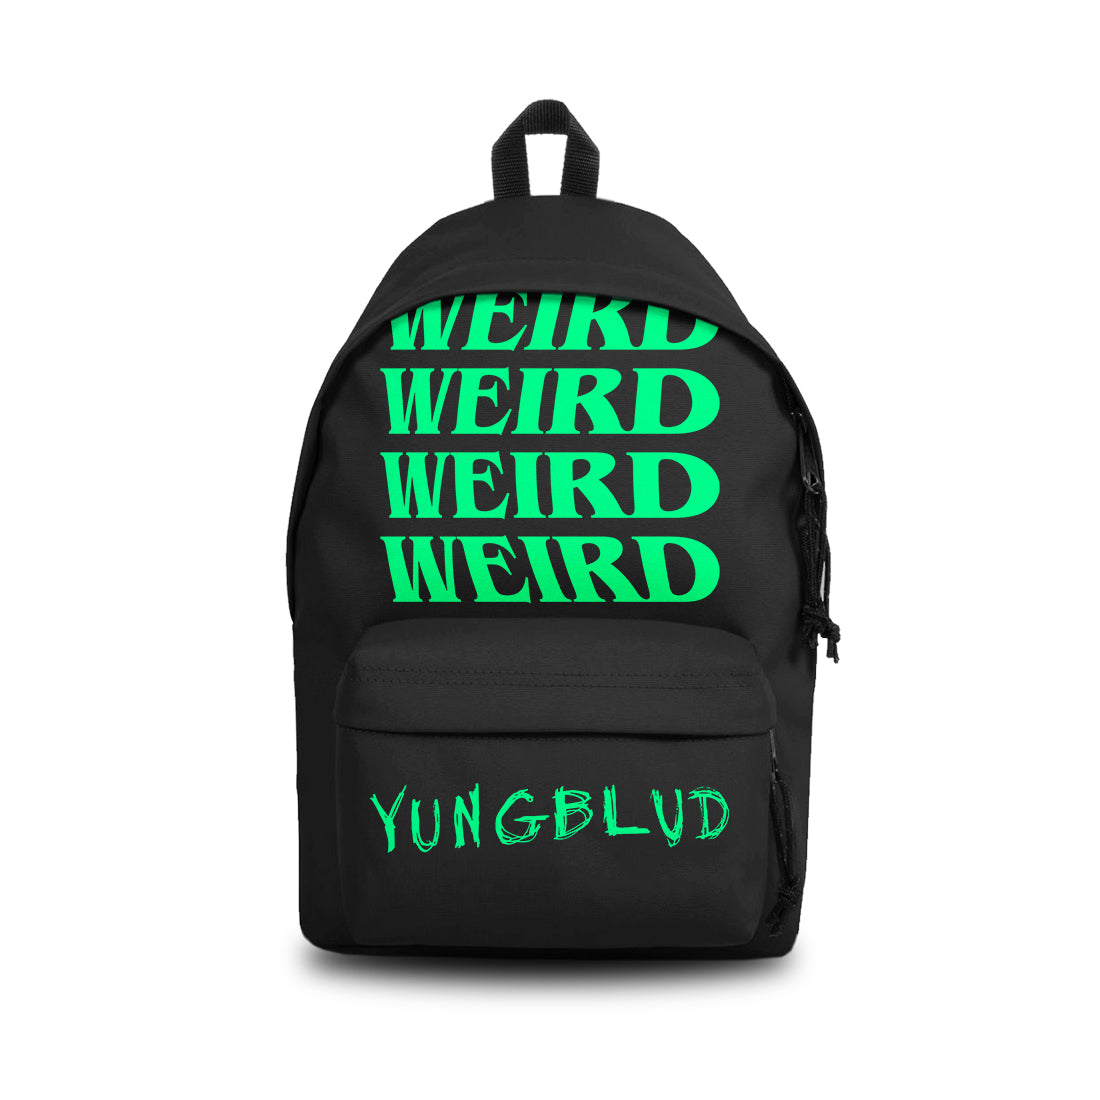 Rocksax Yungblud Daypack - Weird! Repeated From £34.99